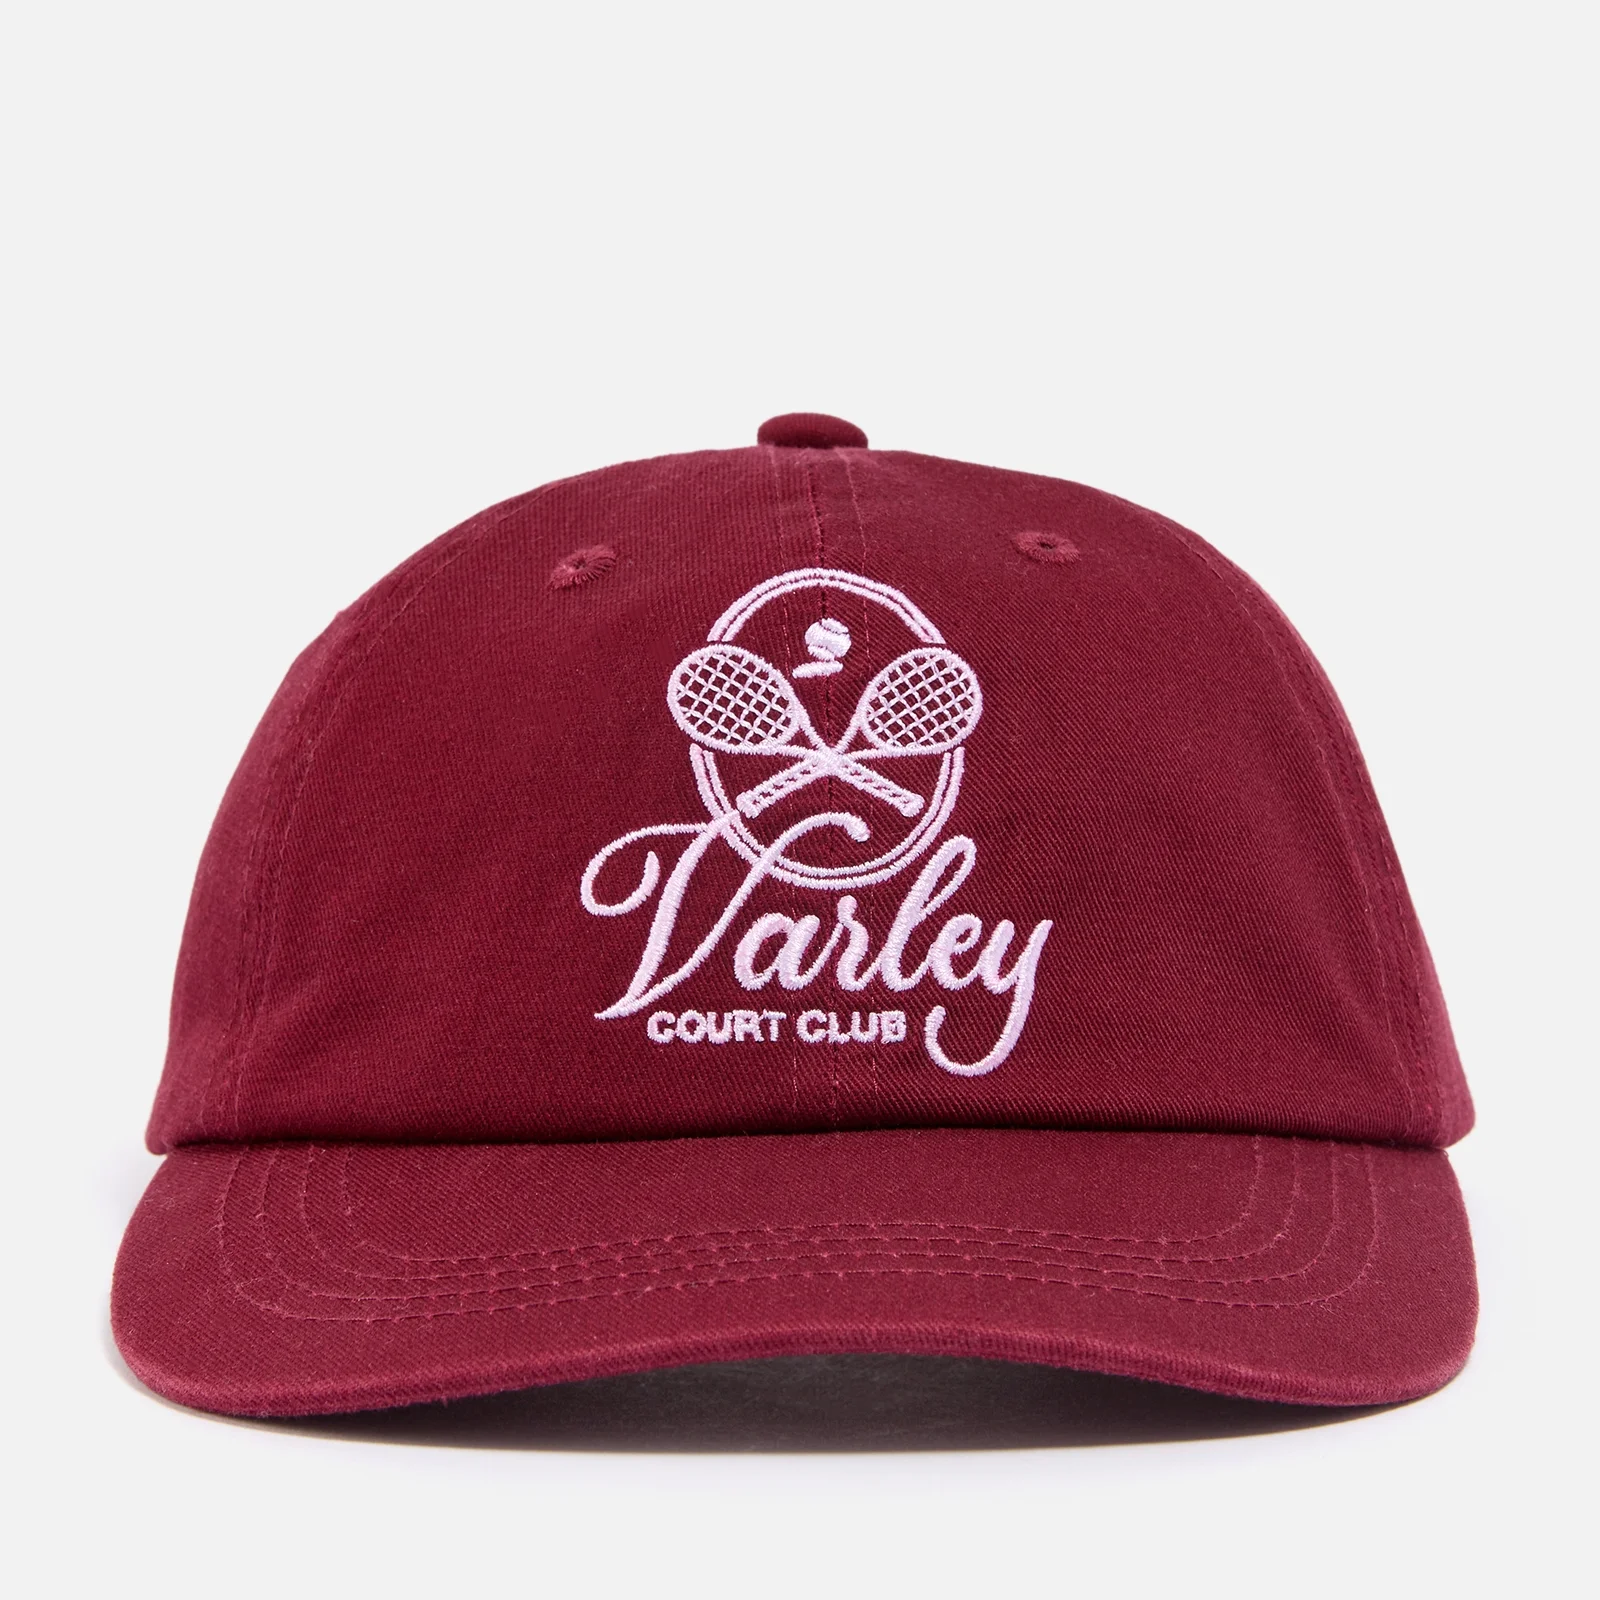 Varley Noa Club Embroidered Cotton-Twill Cap Image 1